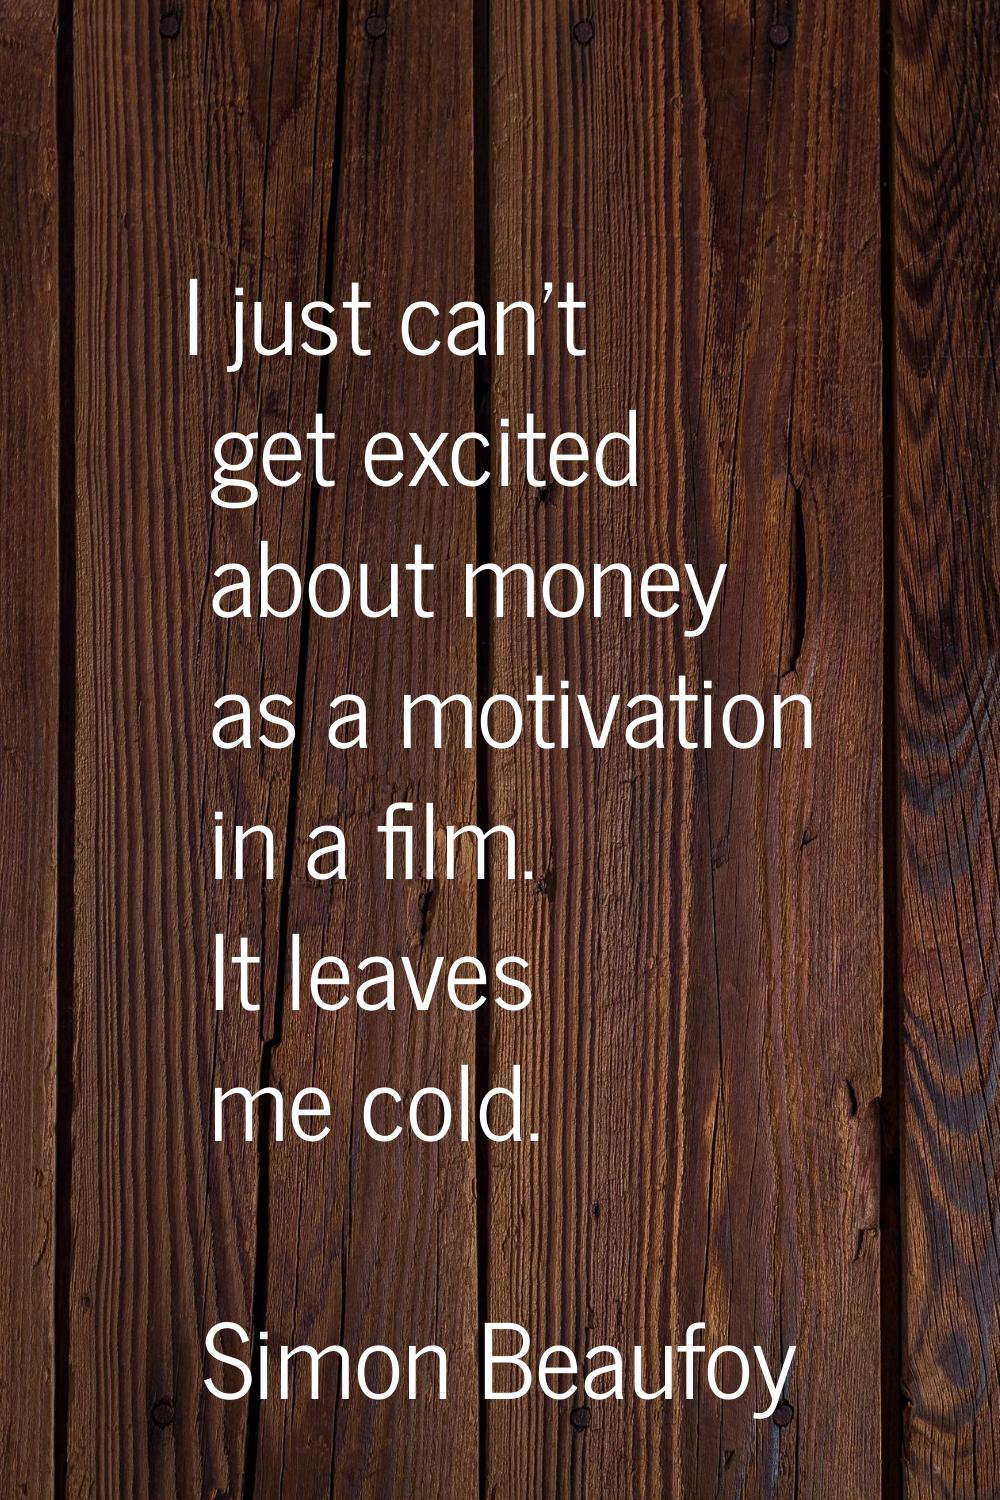 I just can't get excited about money as a motivation in a film. It leaves me cold.